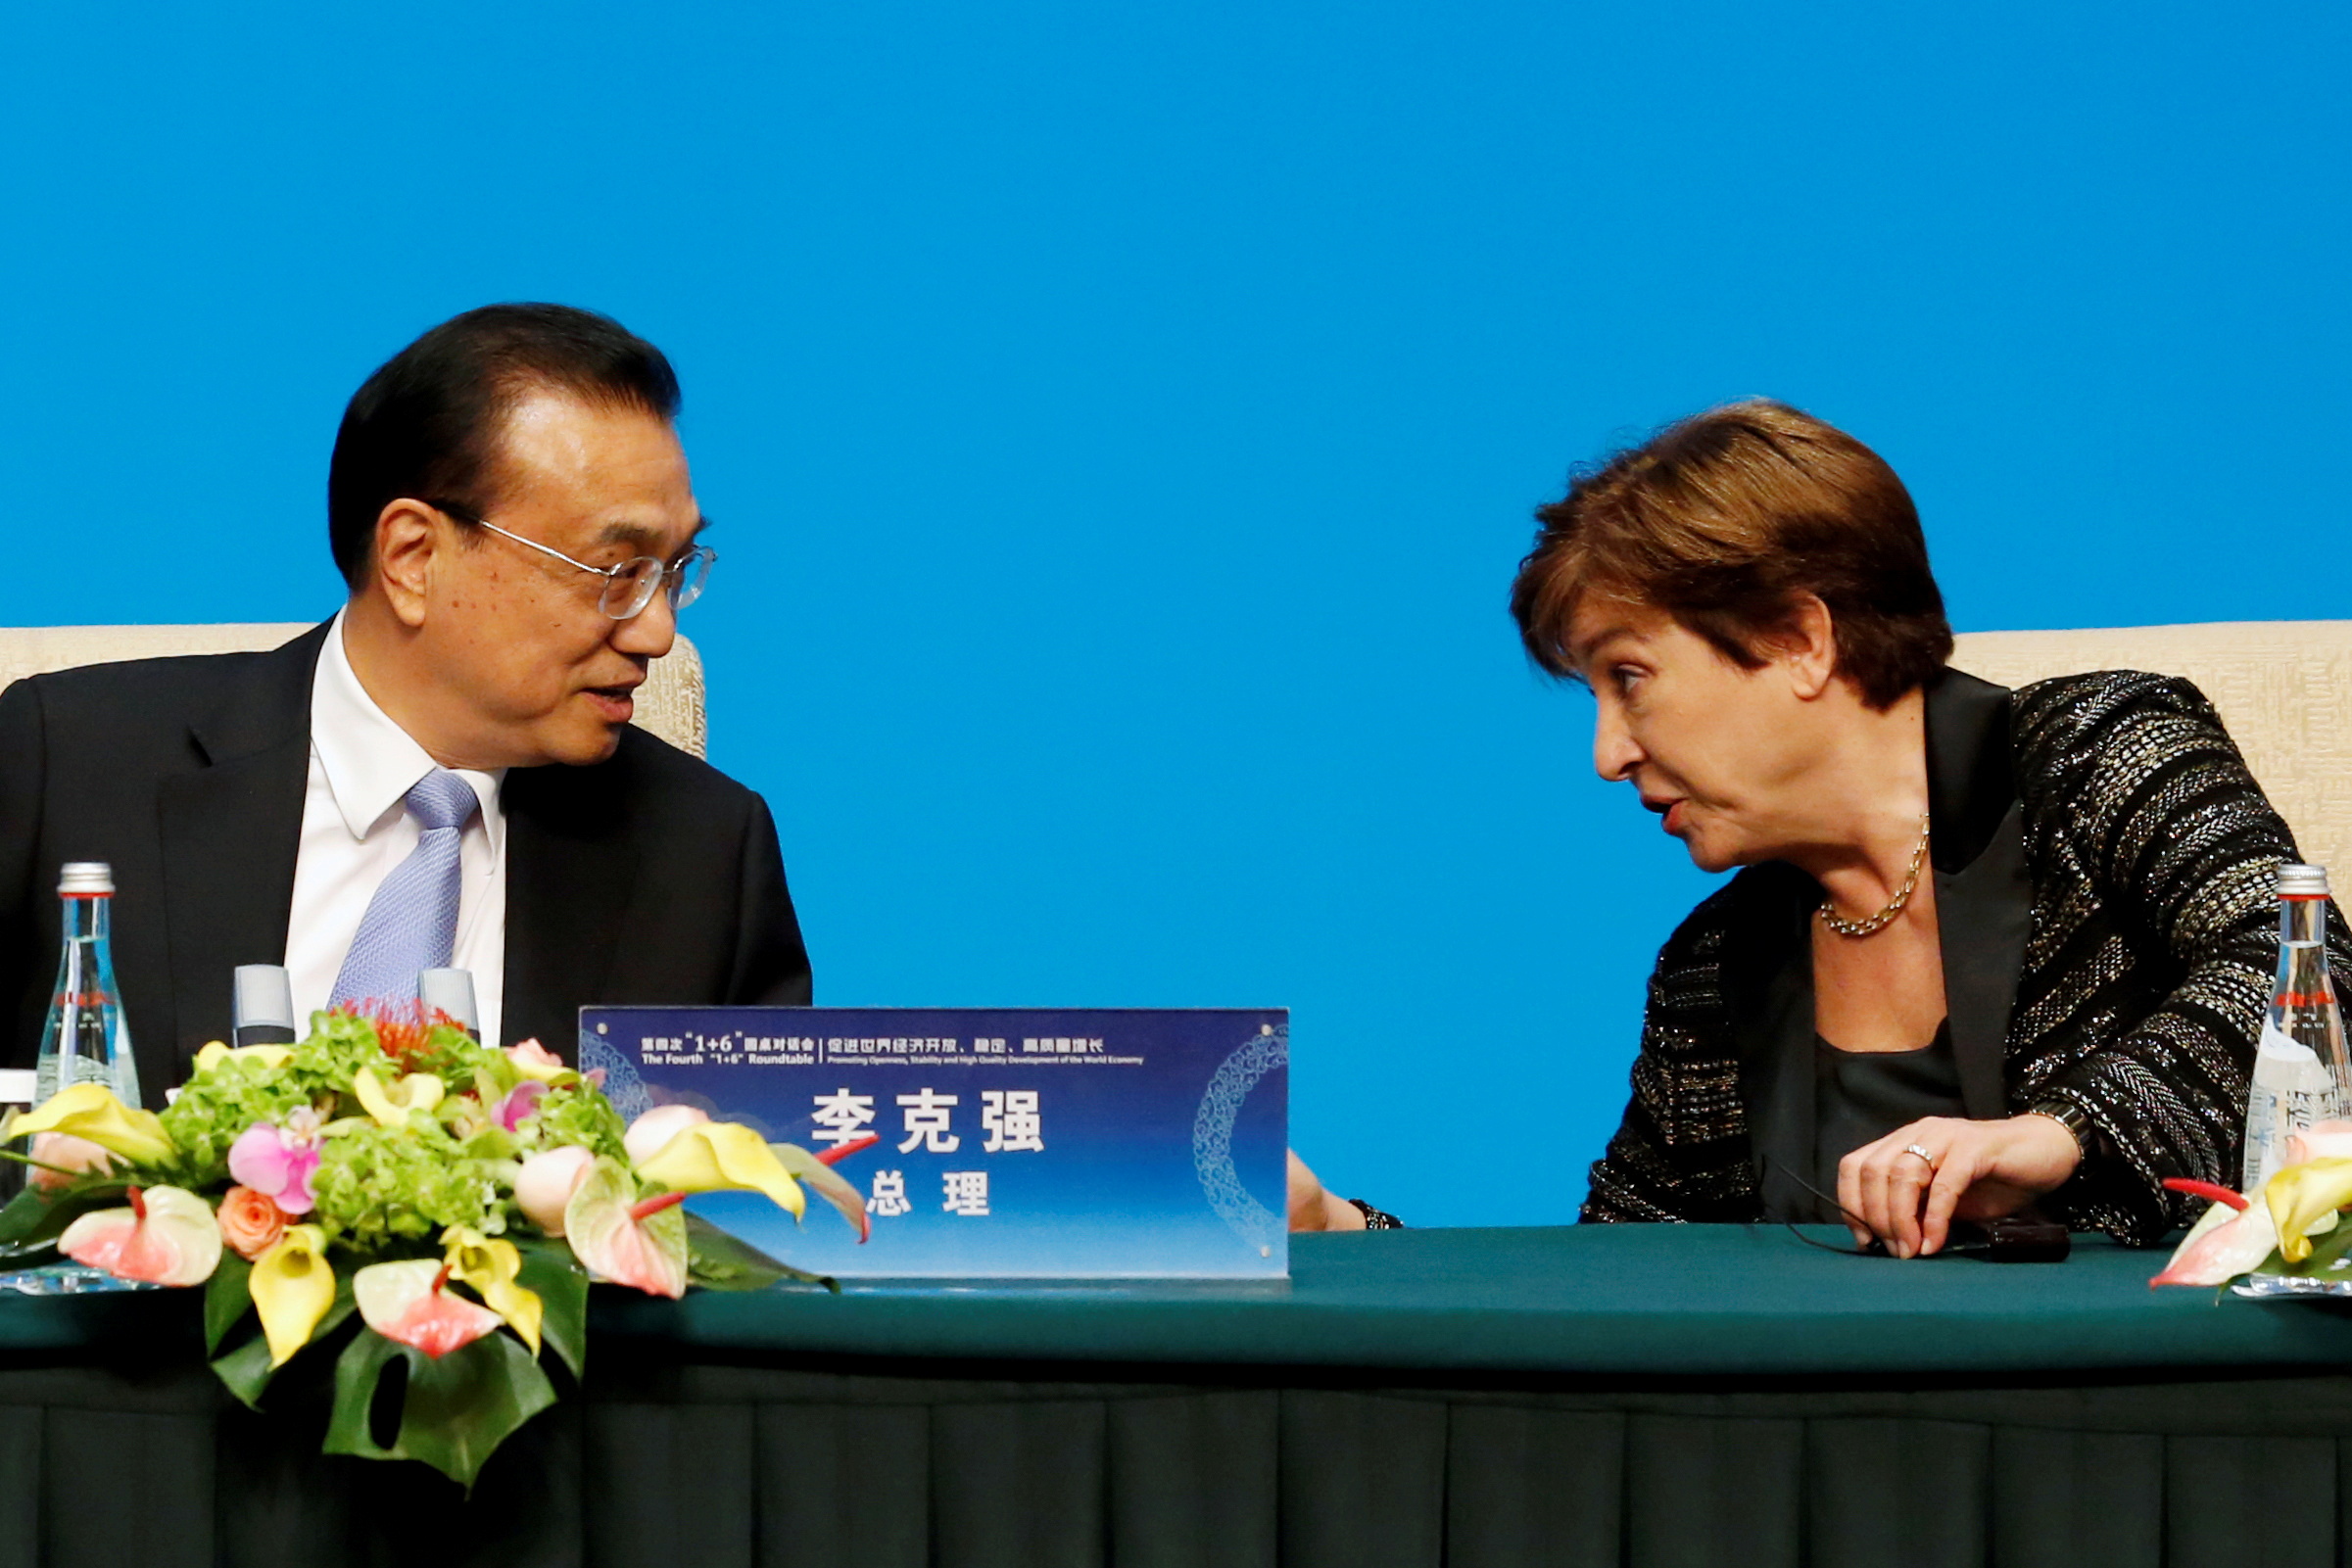 IMF Managing Director Kristalina Georgieva talks to Chinese Premier Li Keqiang before a news conference following the "1+6" Roundtable meeting at the Diaoyutai state guesthouse in Beijing